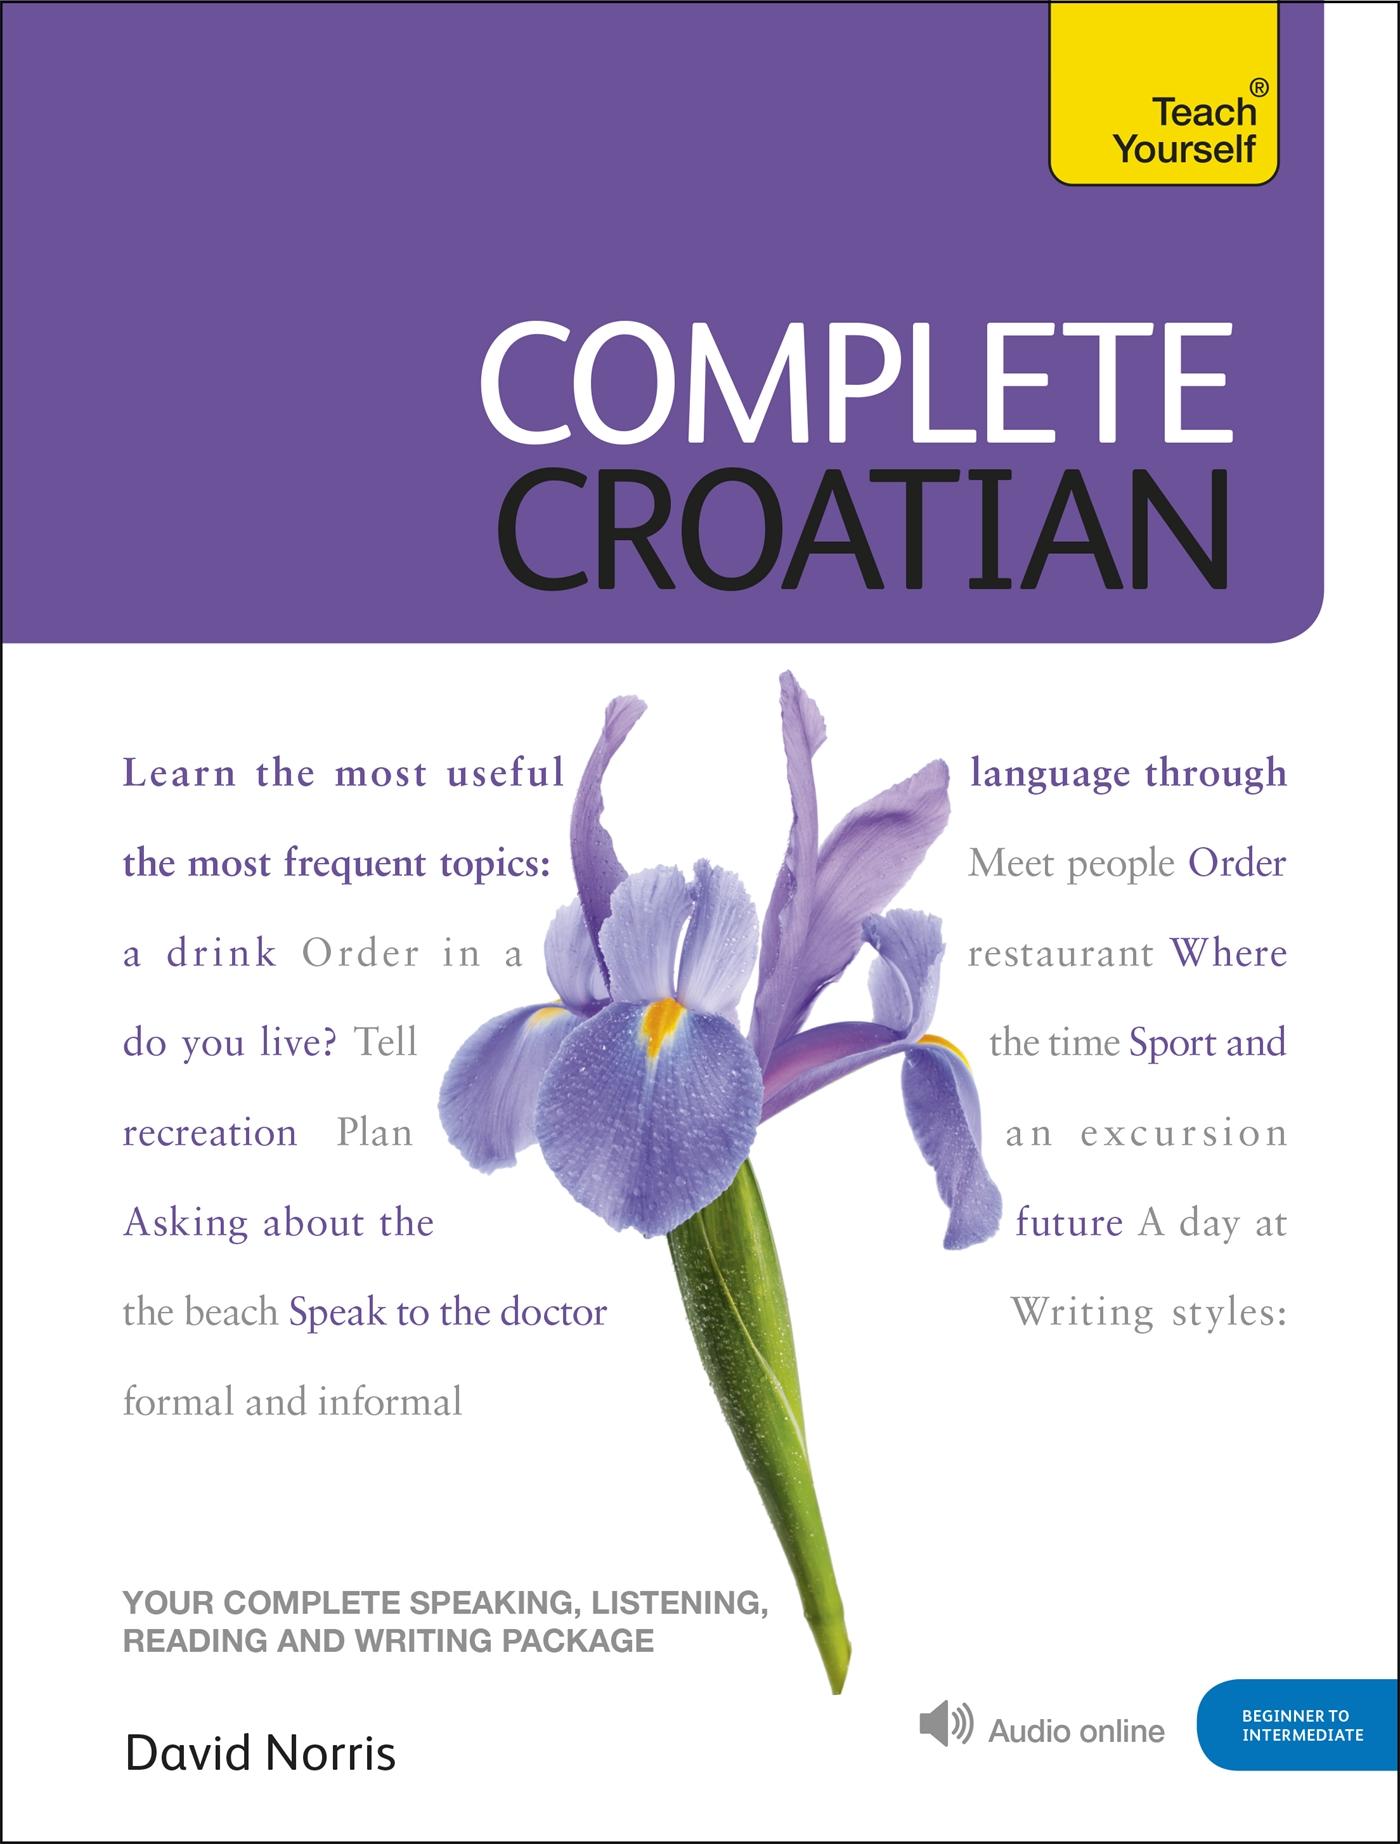 Complete Croatian Book/CD Pack: Teach Yourself / (Book and audio support) / David Norris / Taschenbuch / Bundle / Englisch / 2010 / Hodder And Stoughton Ltd. / EAN 9781444102321 - Norris, David